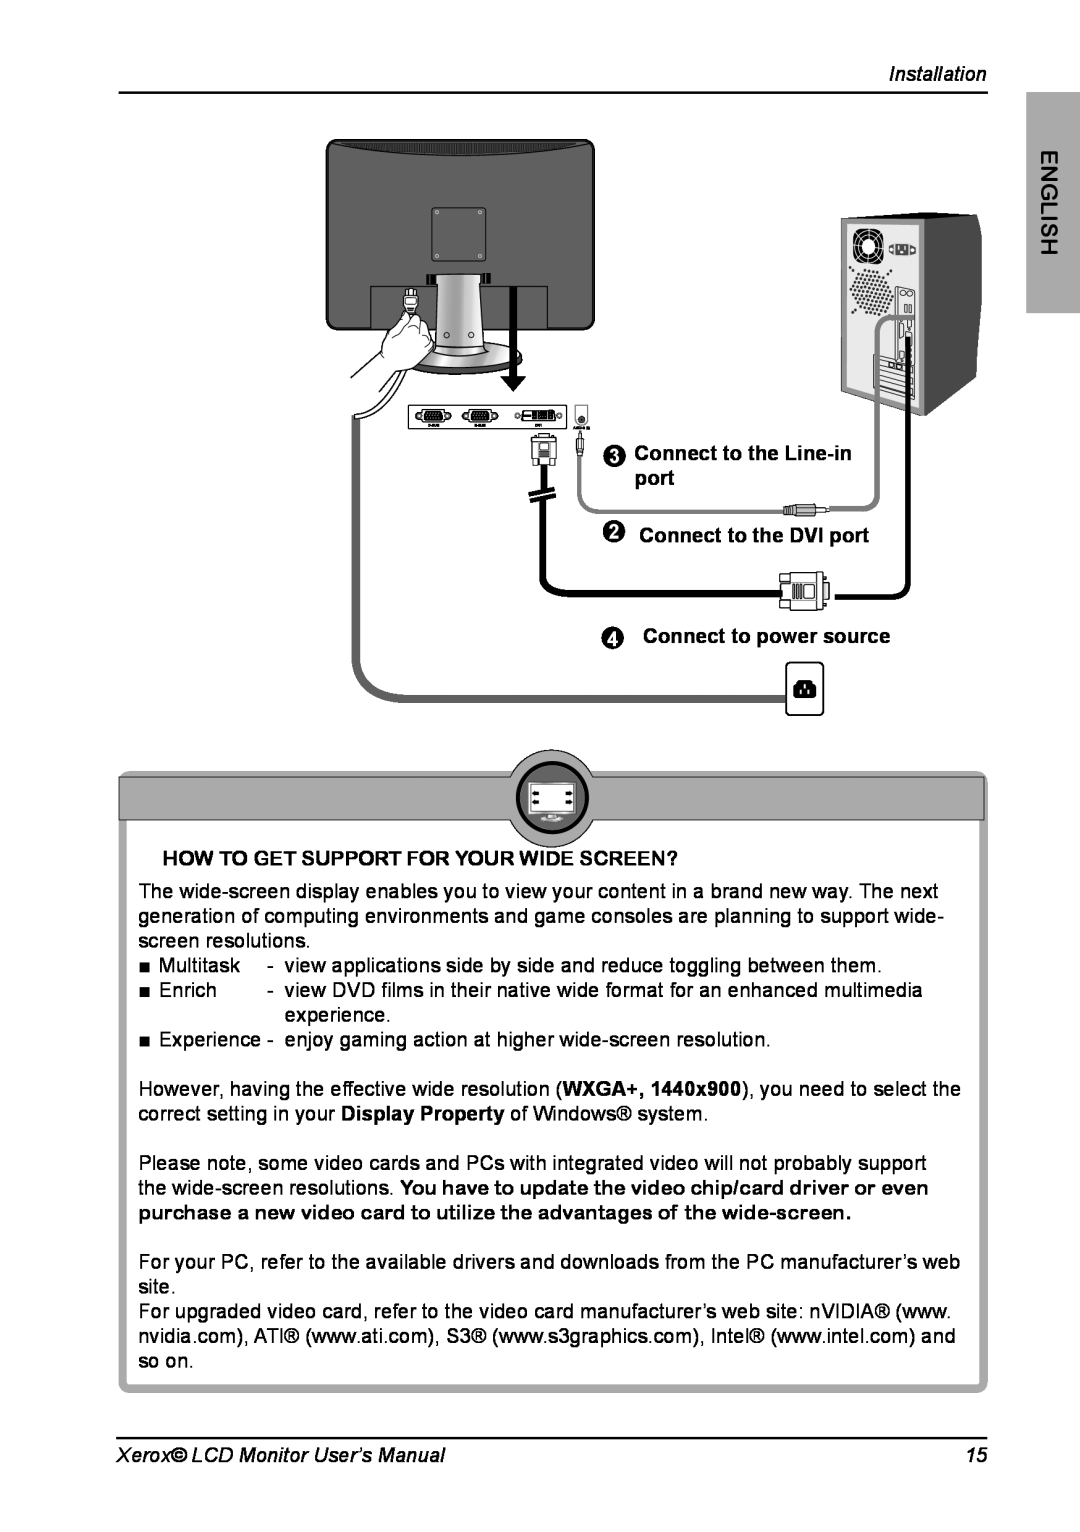 Xerox XM3-19w English, Installation, Connect to the Line-in port, Connect to the DVI port, Xerox LCD Monitor User’s Manual 